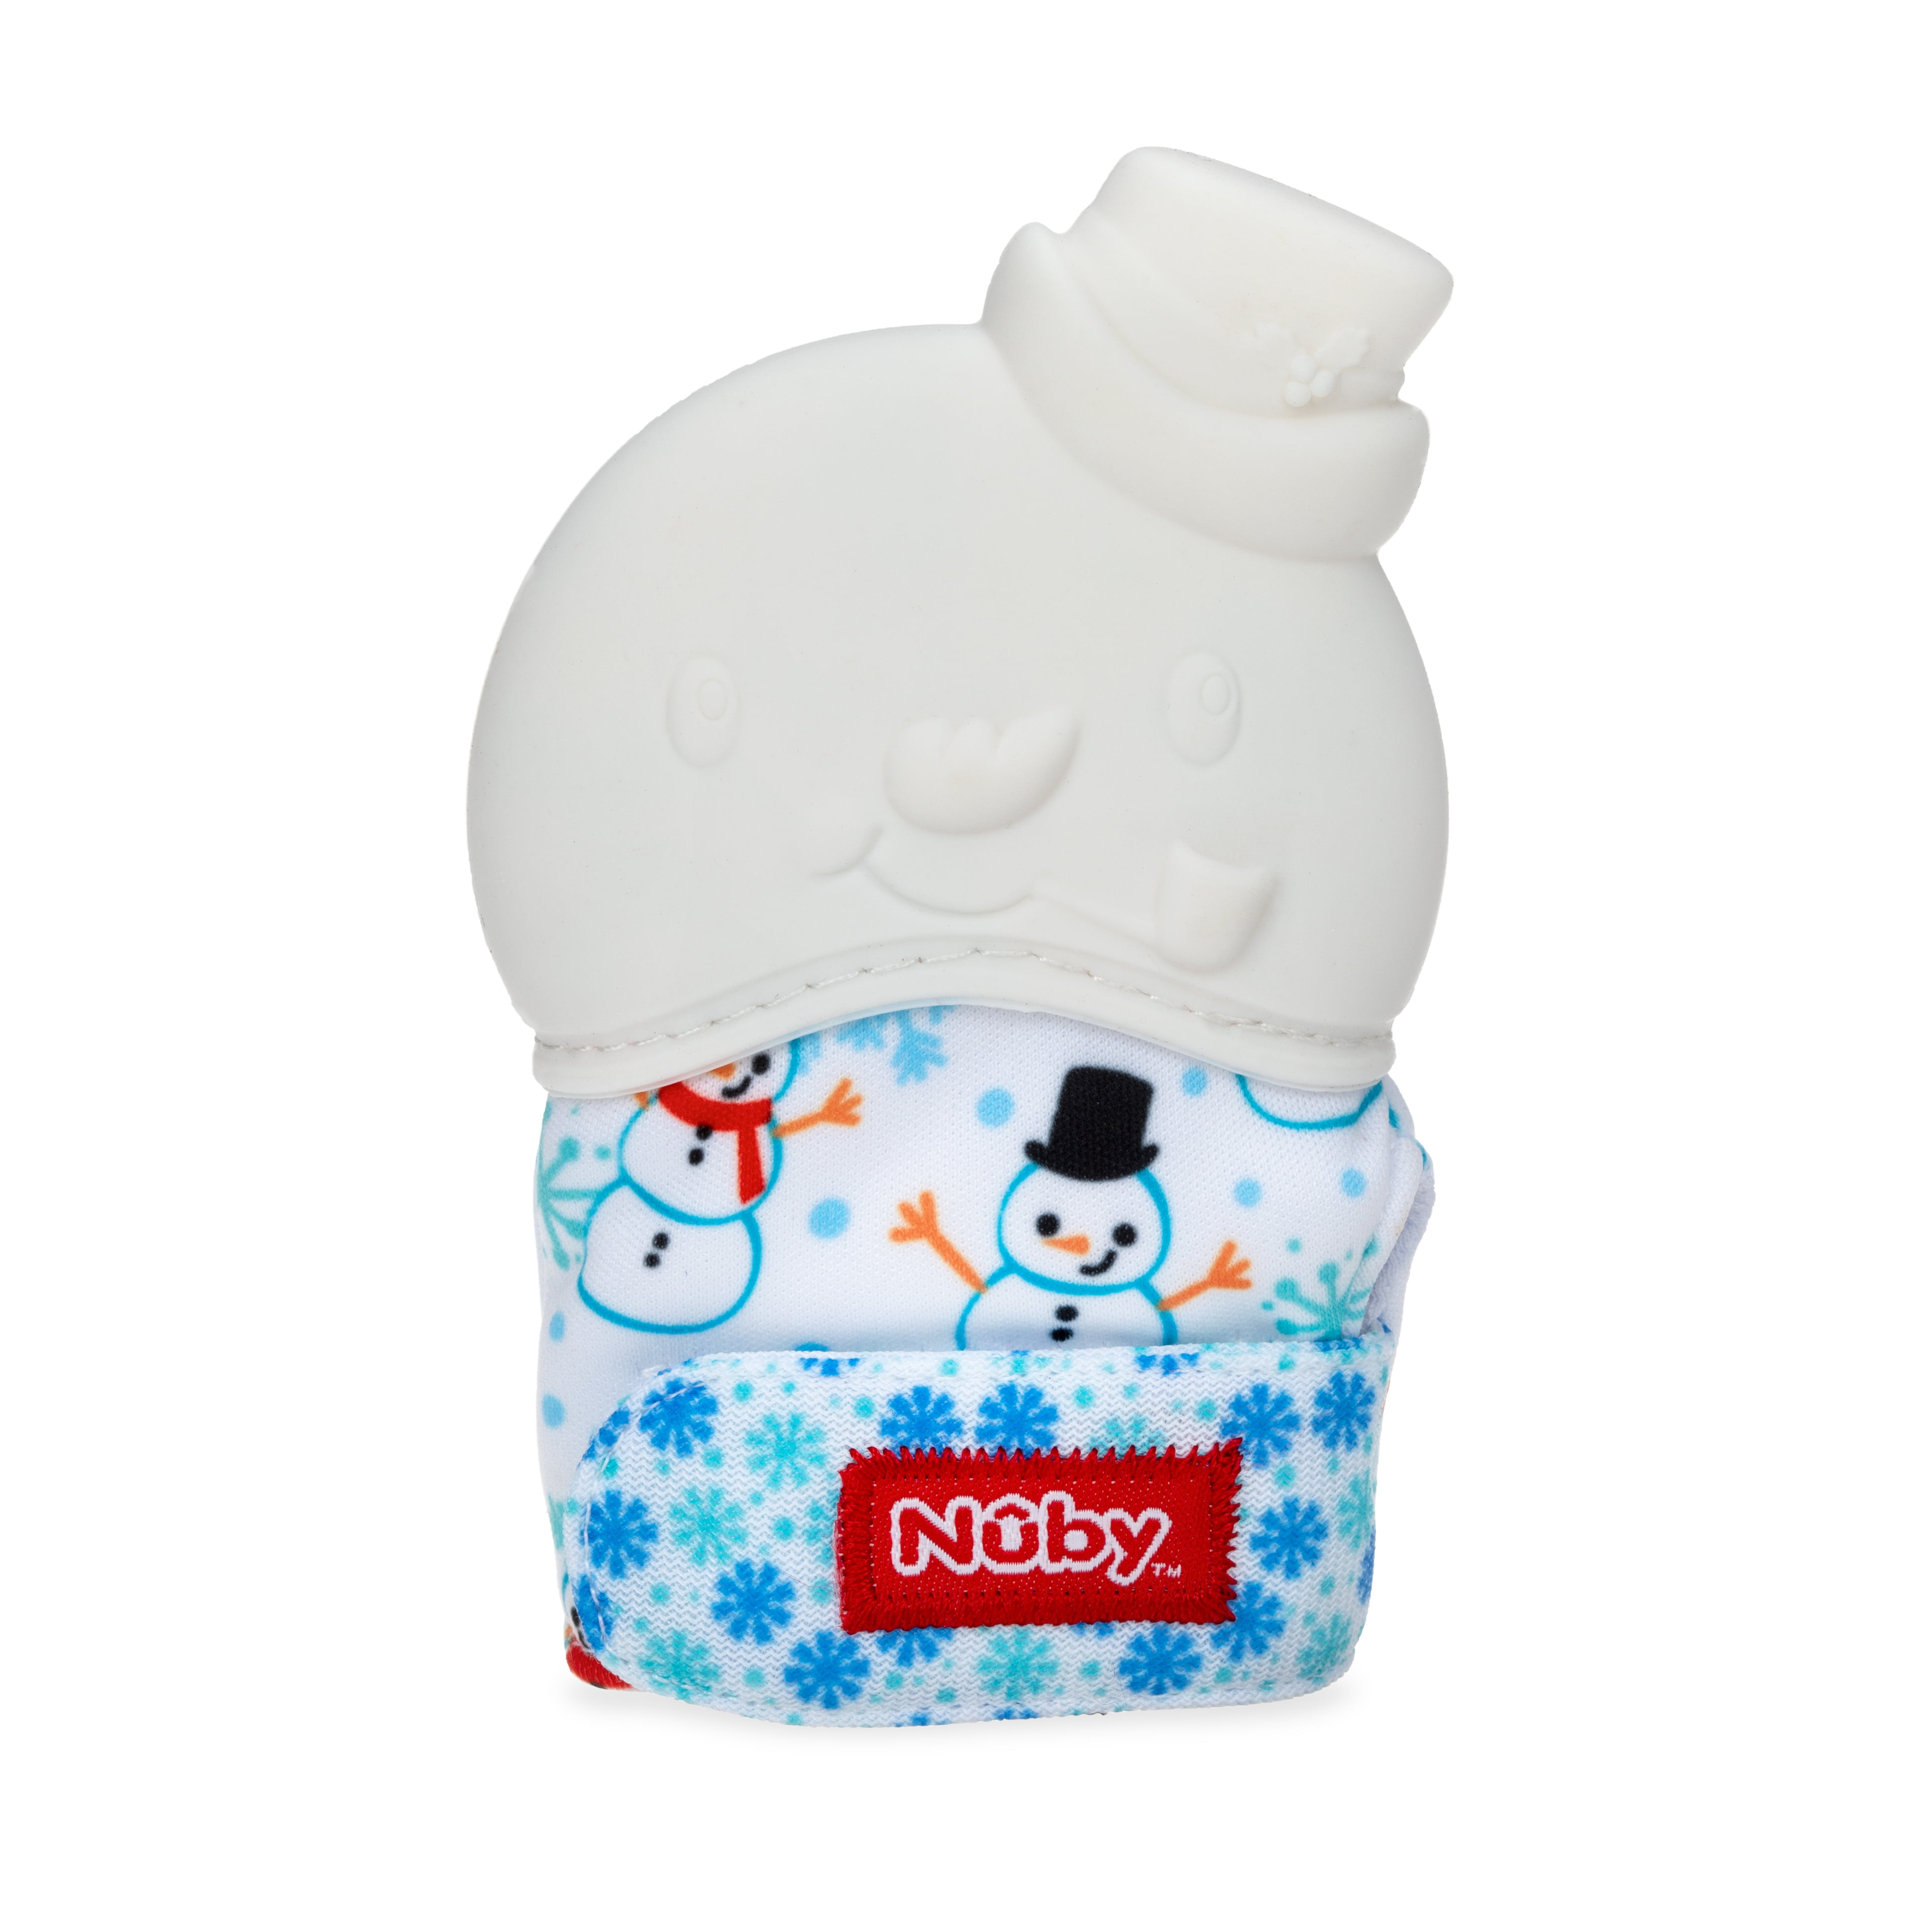 Nuby Happy Hands Holiday Soothing Teething Mitten, Snowman - Walmart.com